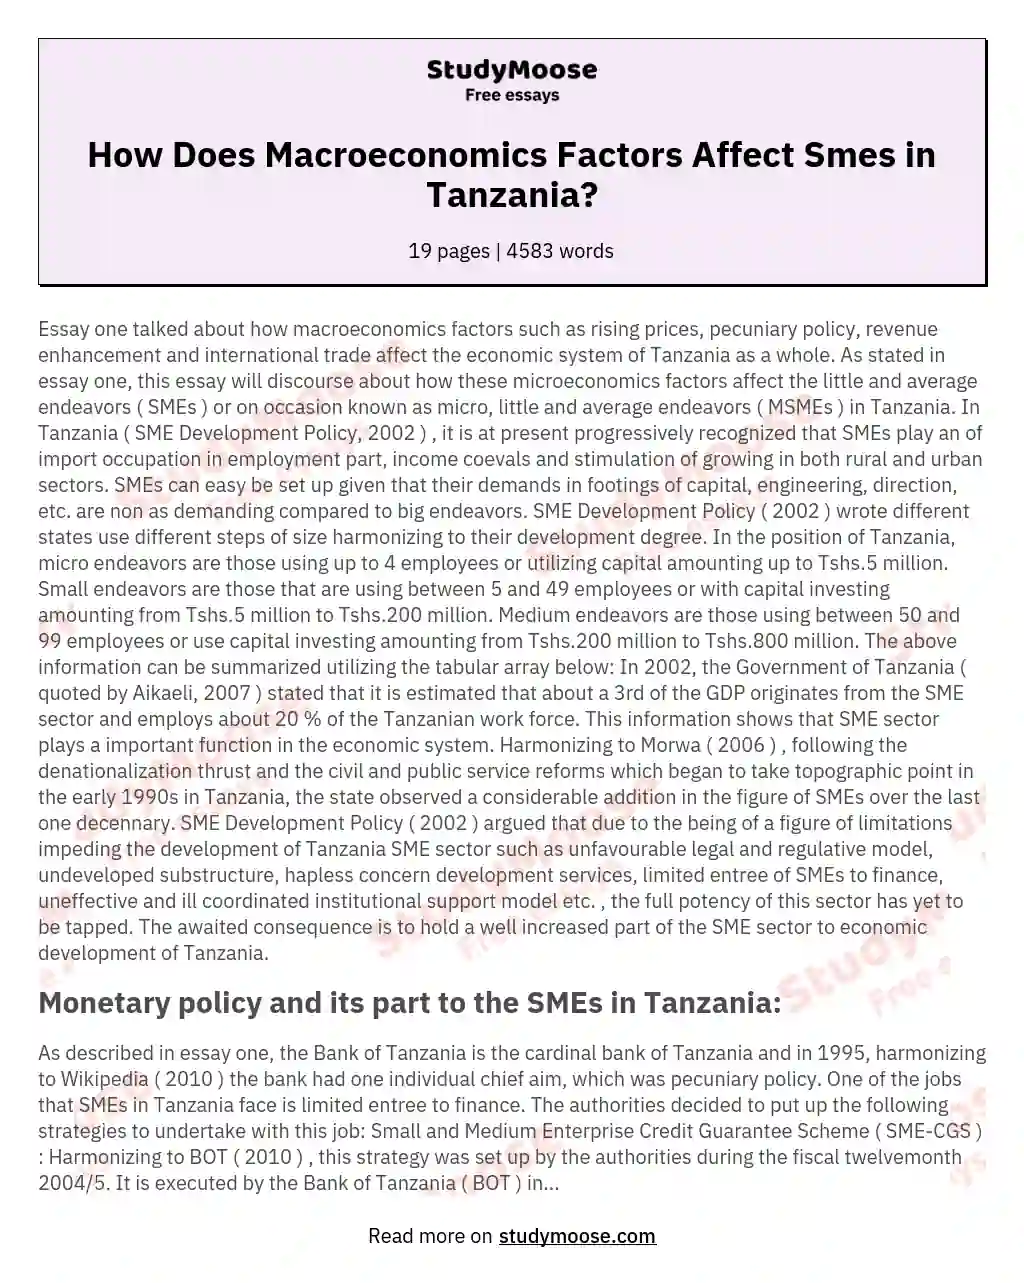 How Does Macroeconomics Factors Affect Smes in Tanzania?